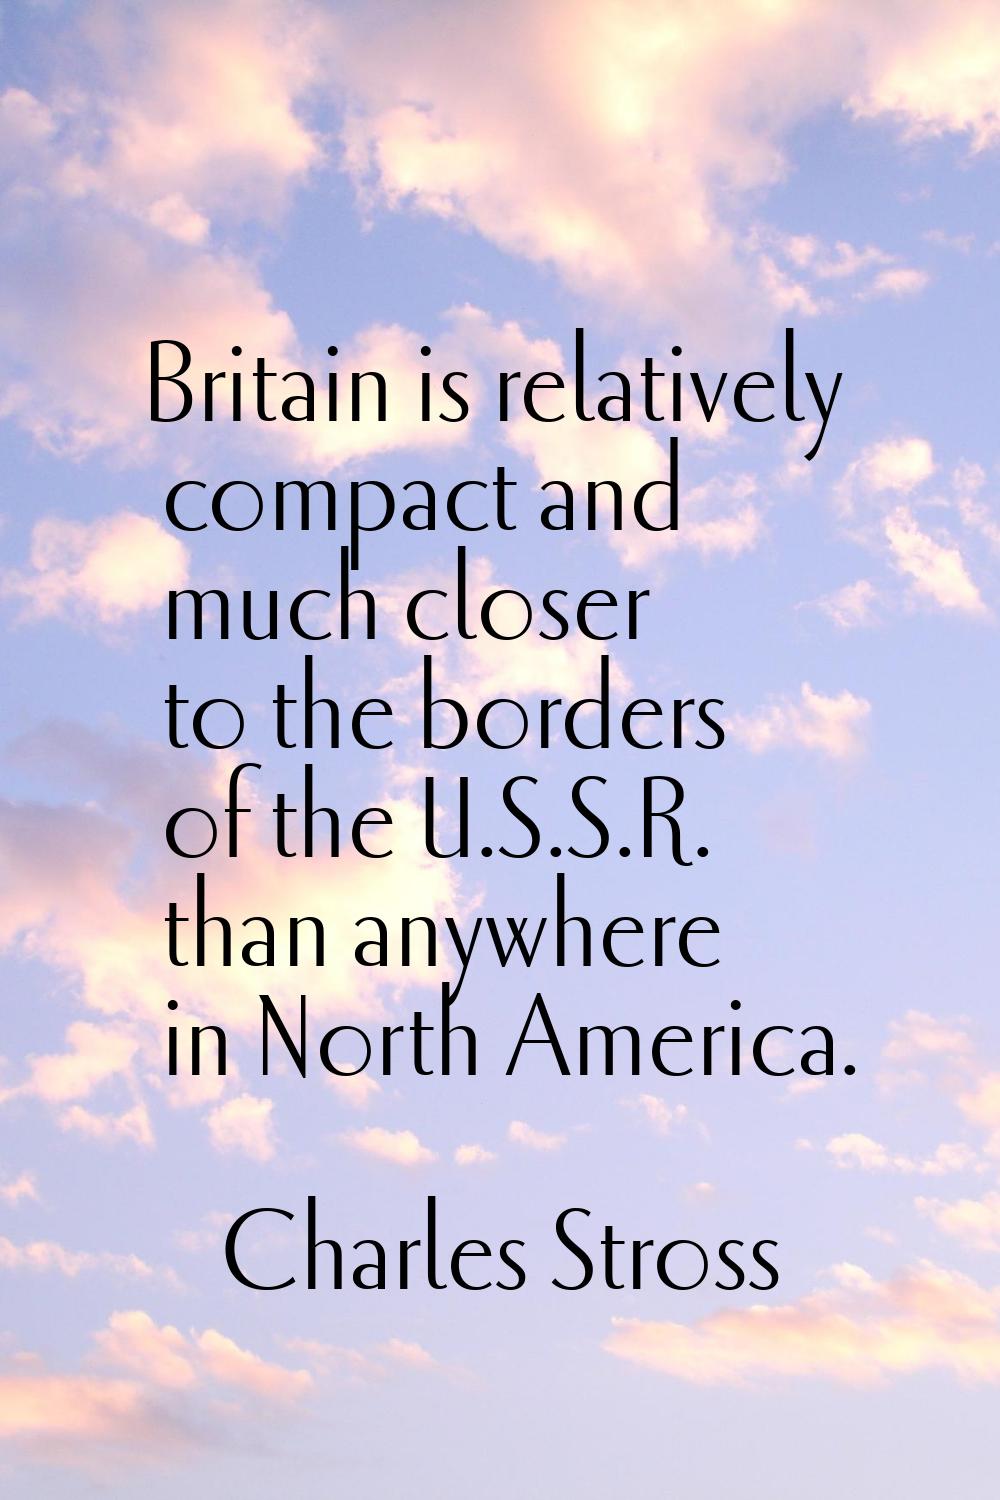 Britain is relatively compact and much closer to the borders of the U.S.S.R. than anywhere in North